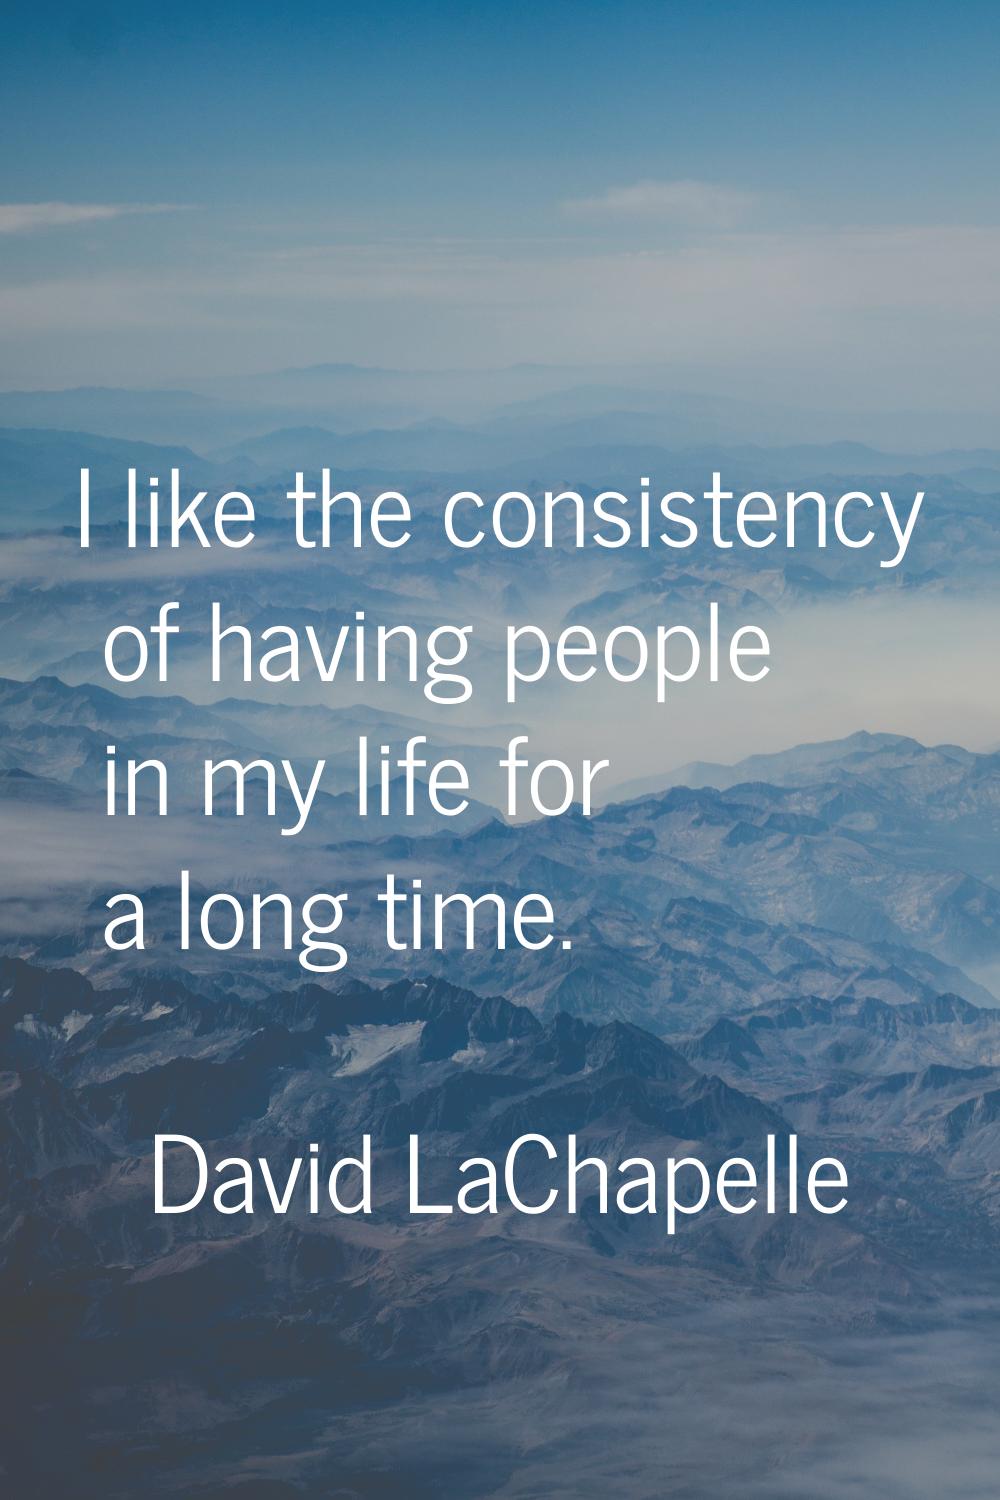 I like the consistency of having people in my life for a long time.